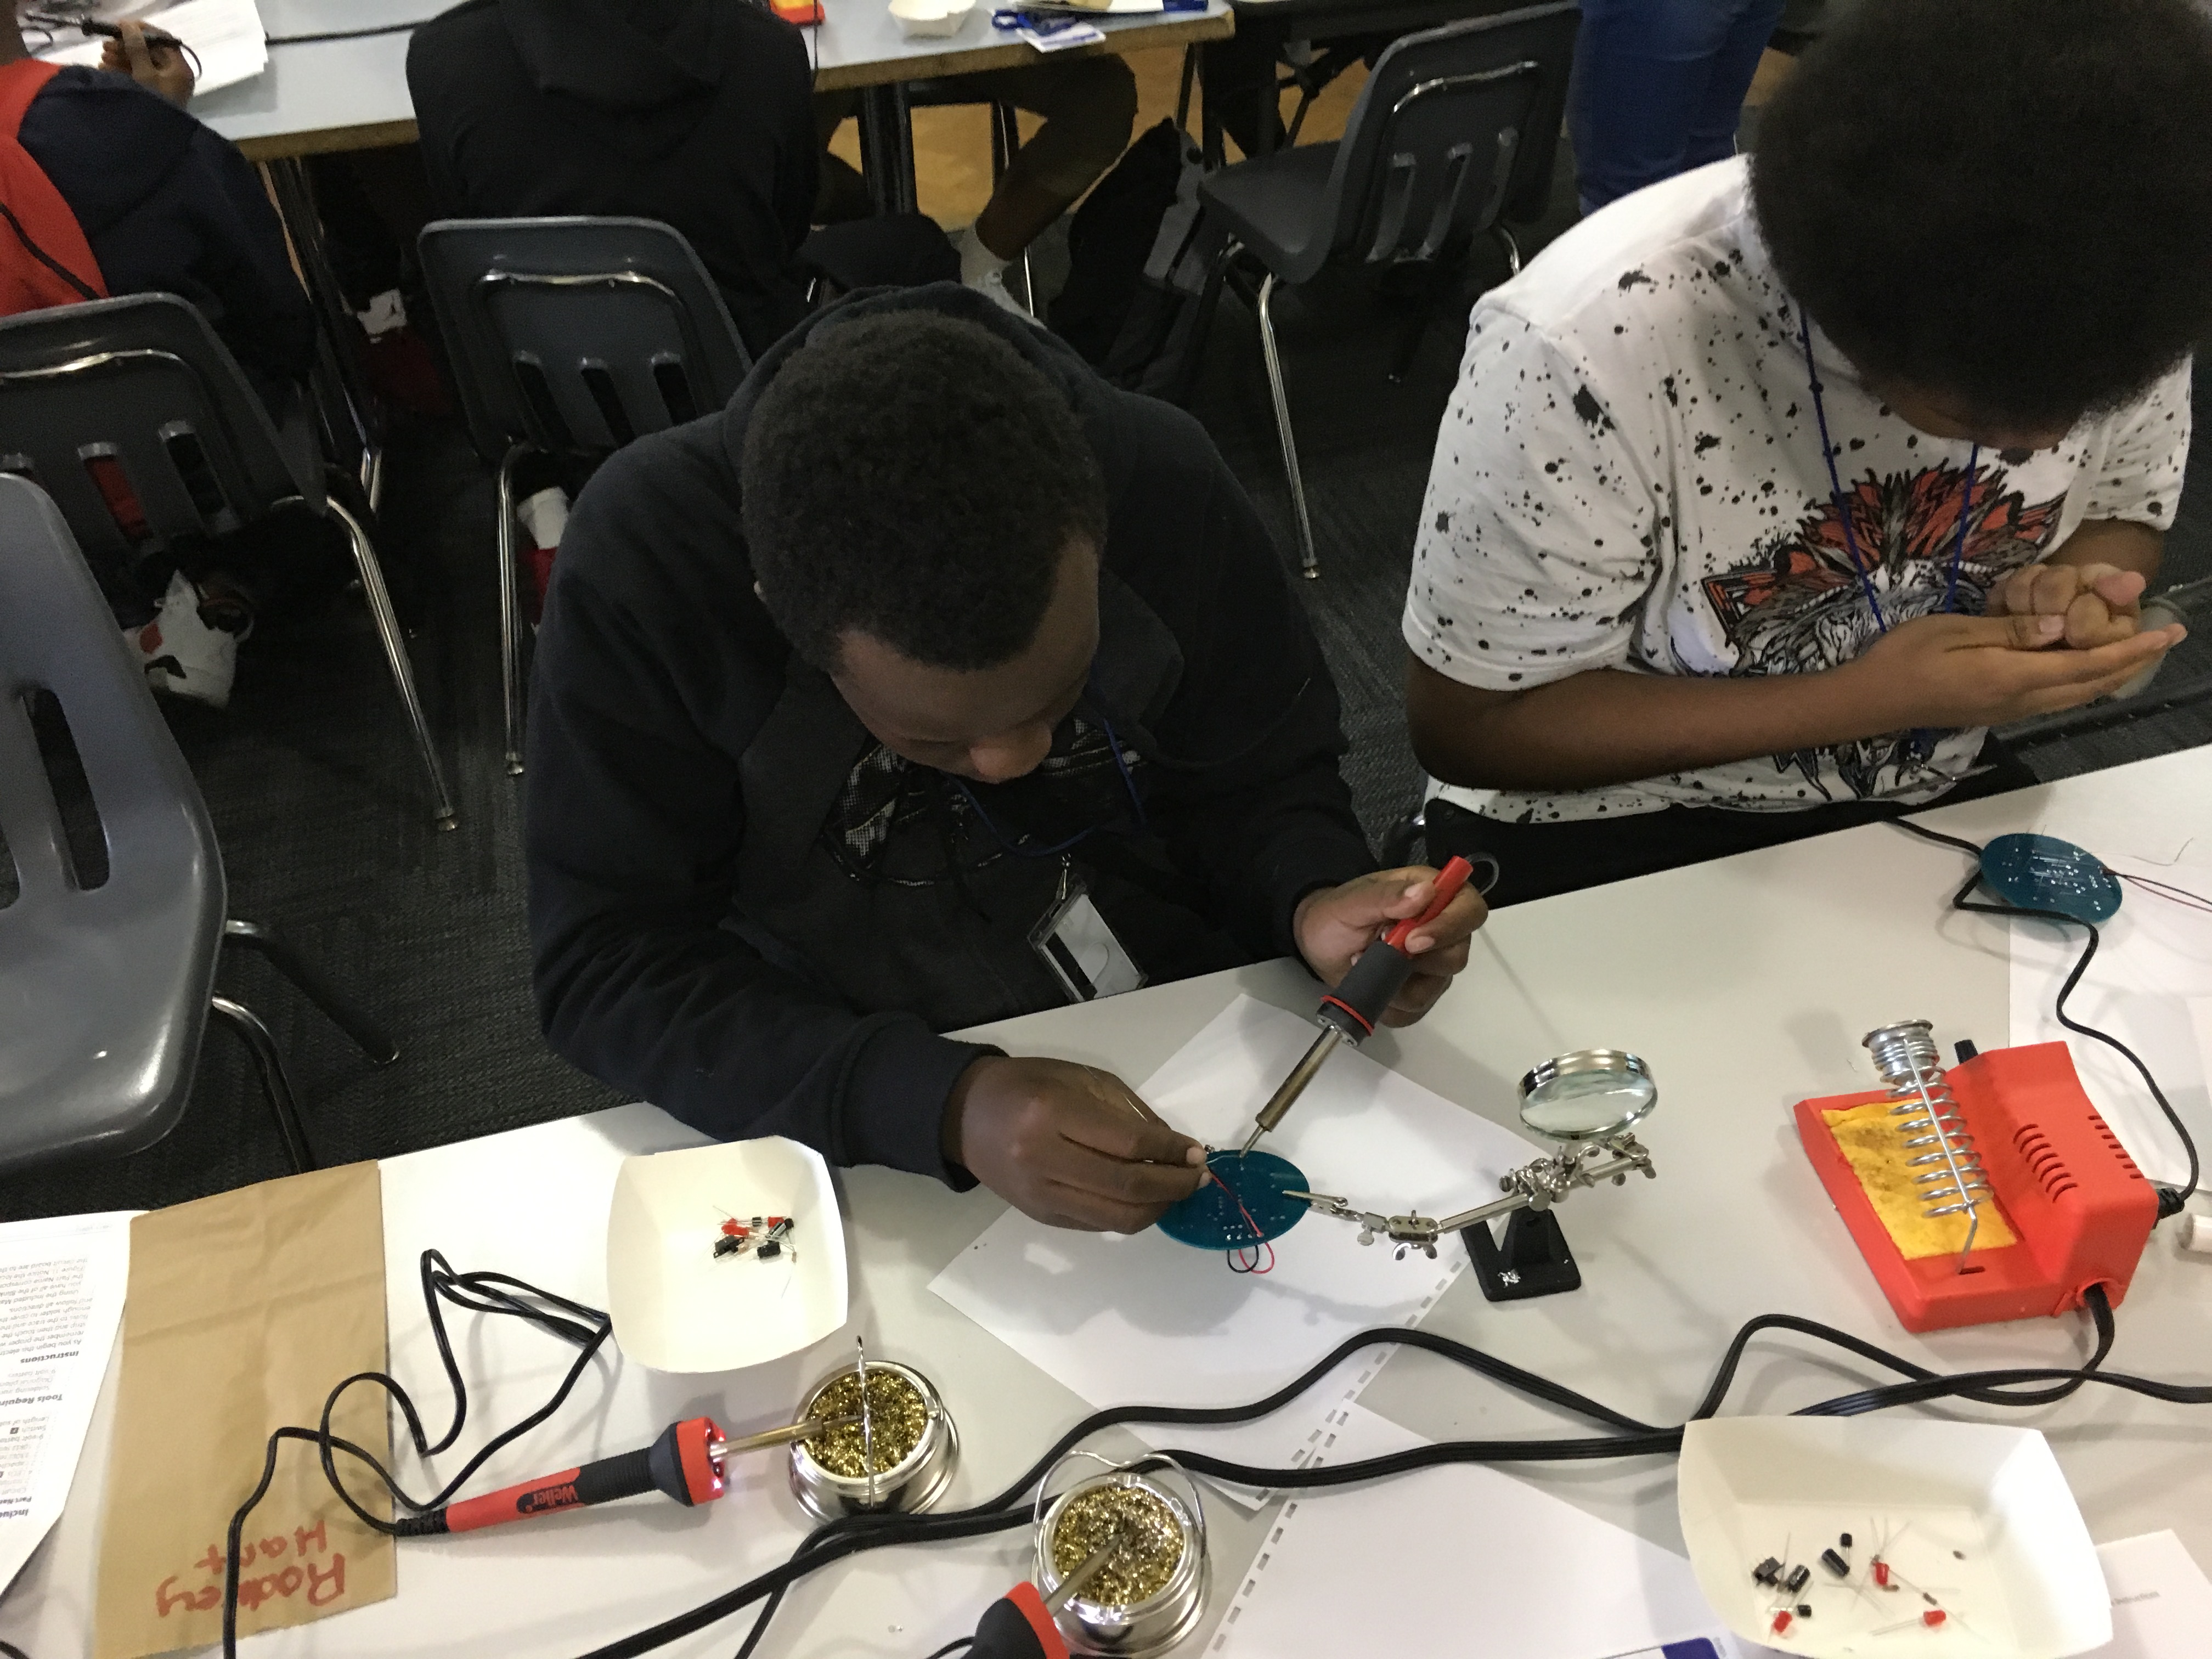 STEAM 1 - Students creating blinky bots